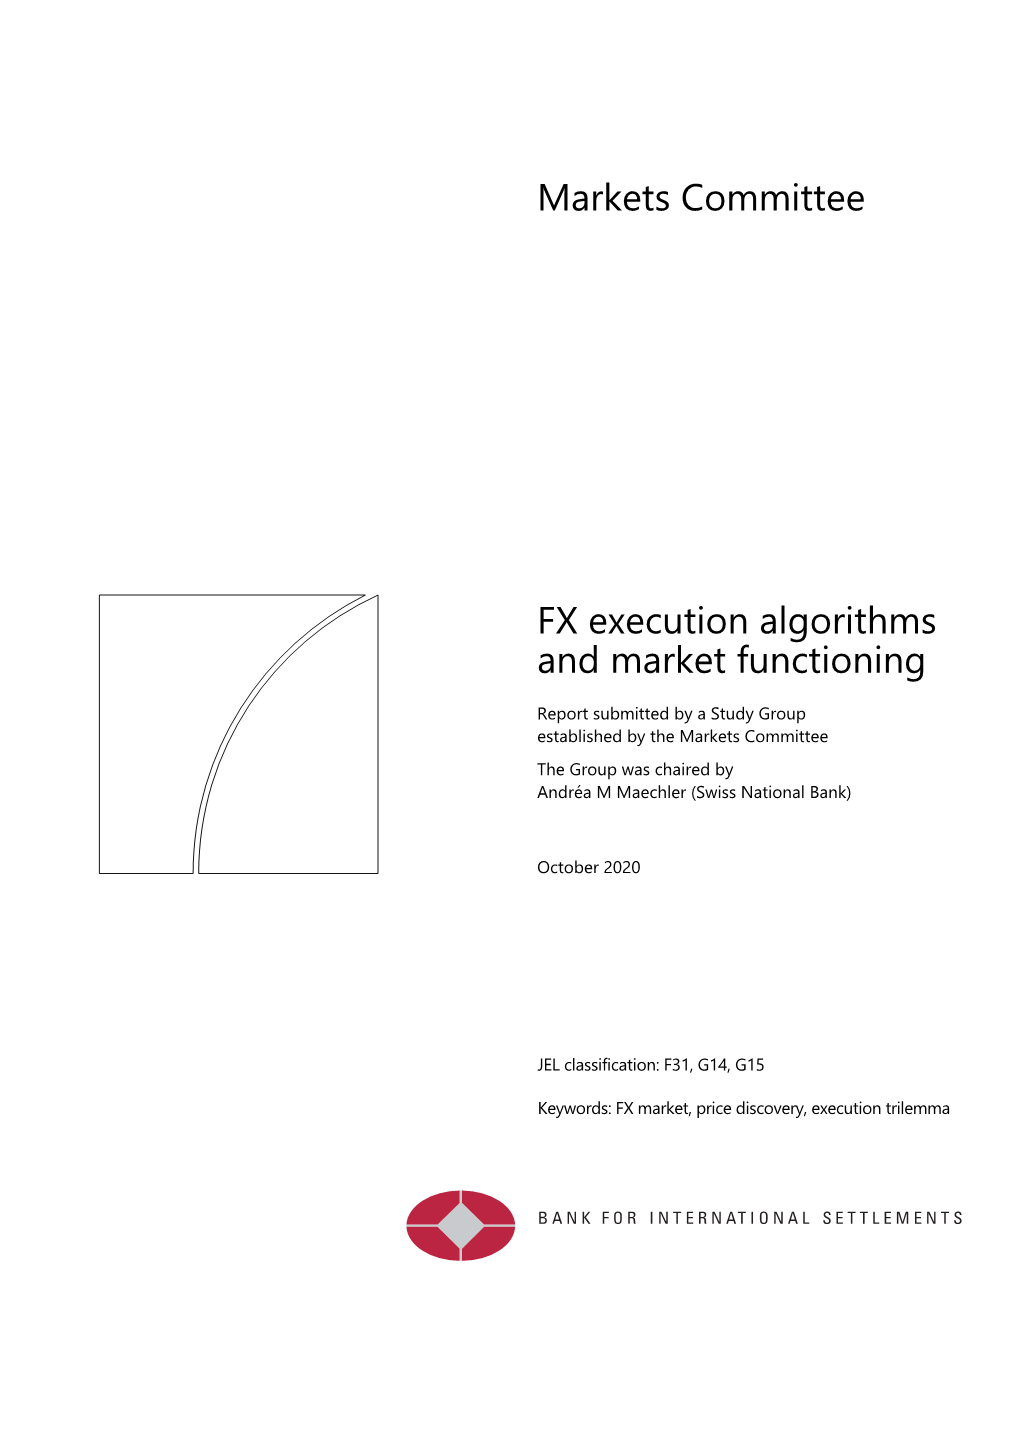 FX Execution Algorithms and Market Functioning